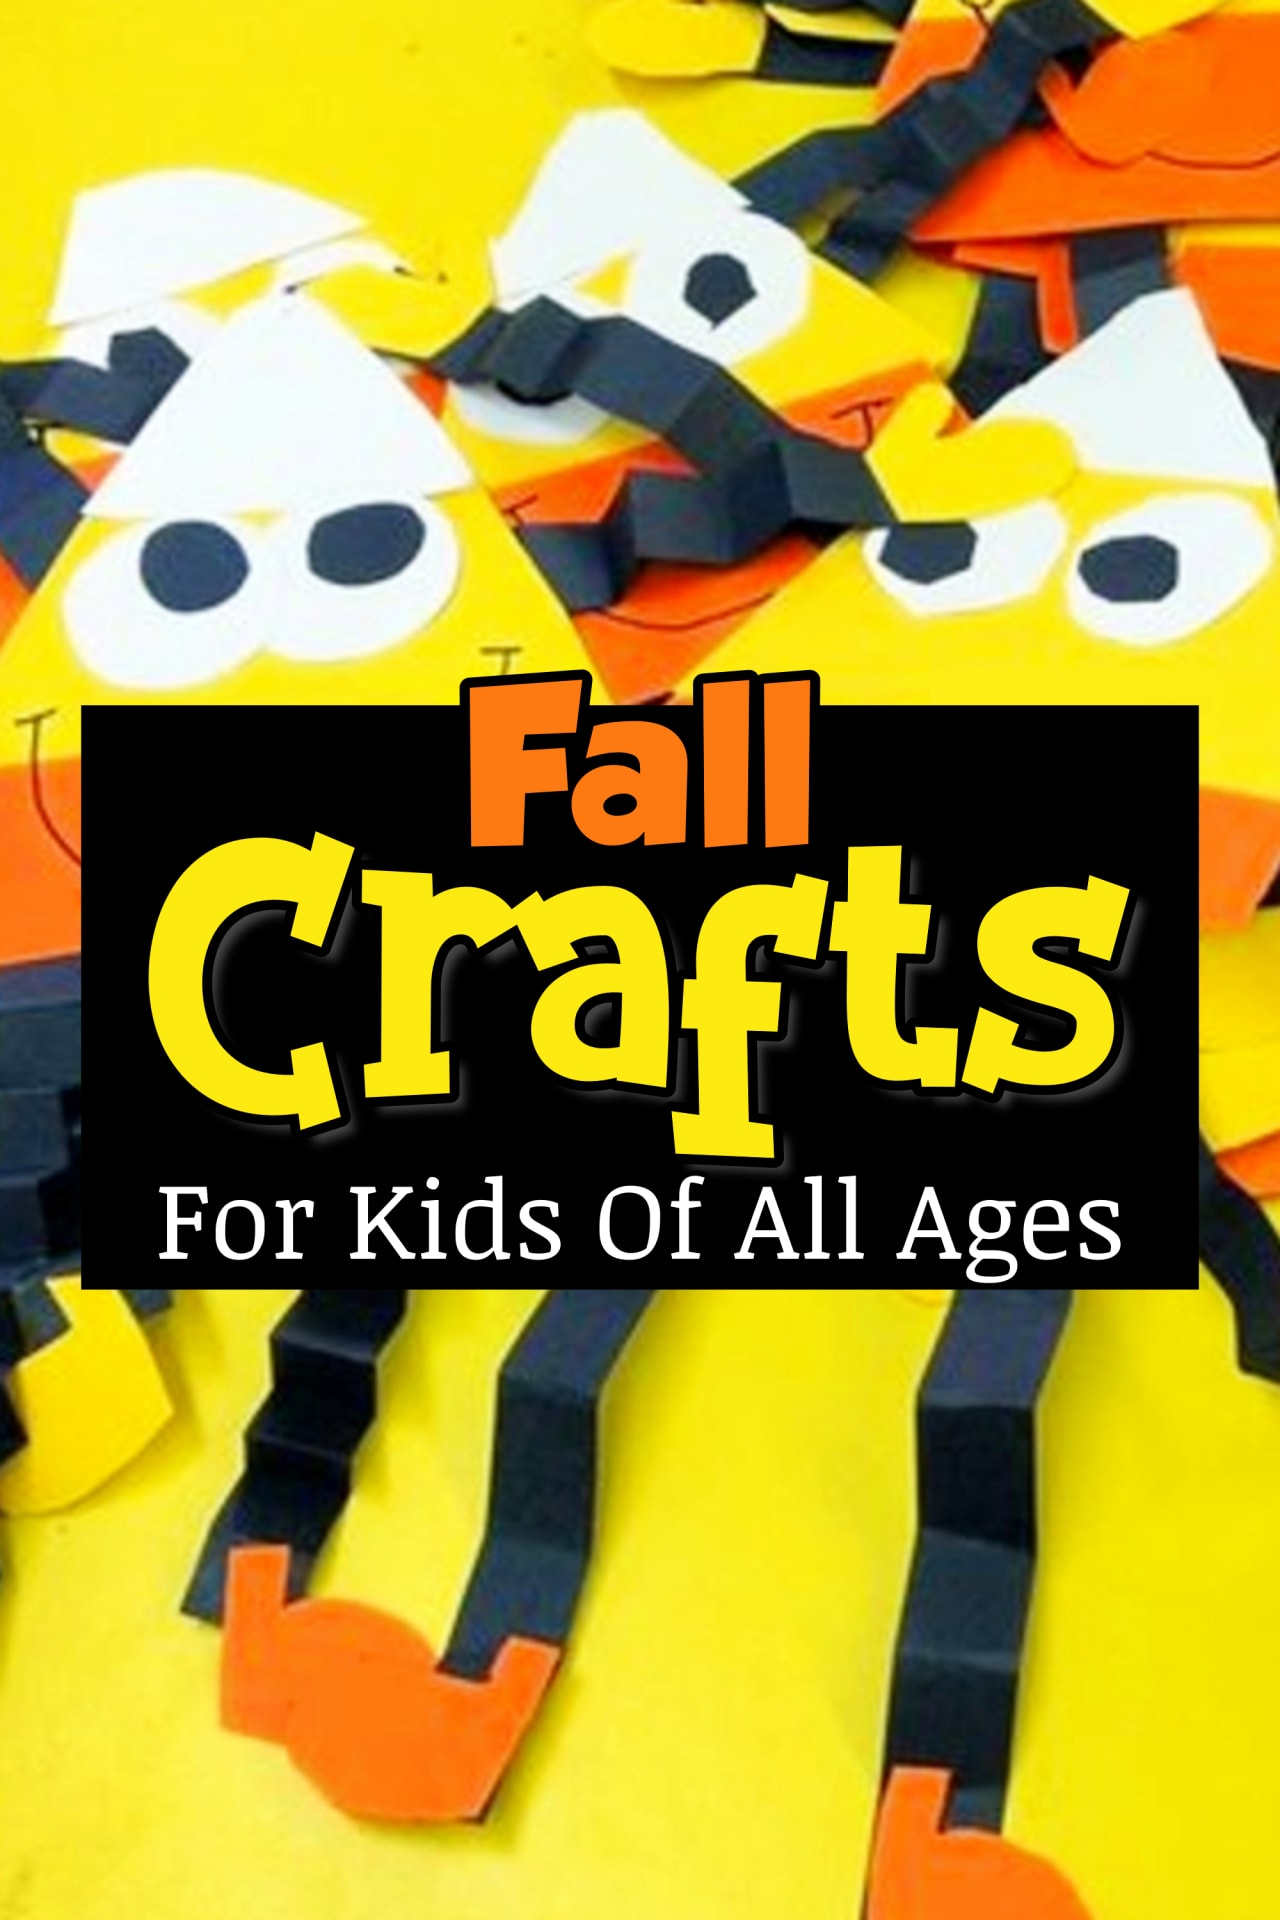 Fall Crafts - Fun & Easy Fall Crafts For Kids To Make - Cute and Easy DIY Kids Fall Crafts To Make at Preschool, Pre-K, Sunday School Or a Fun Craft Project At Home